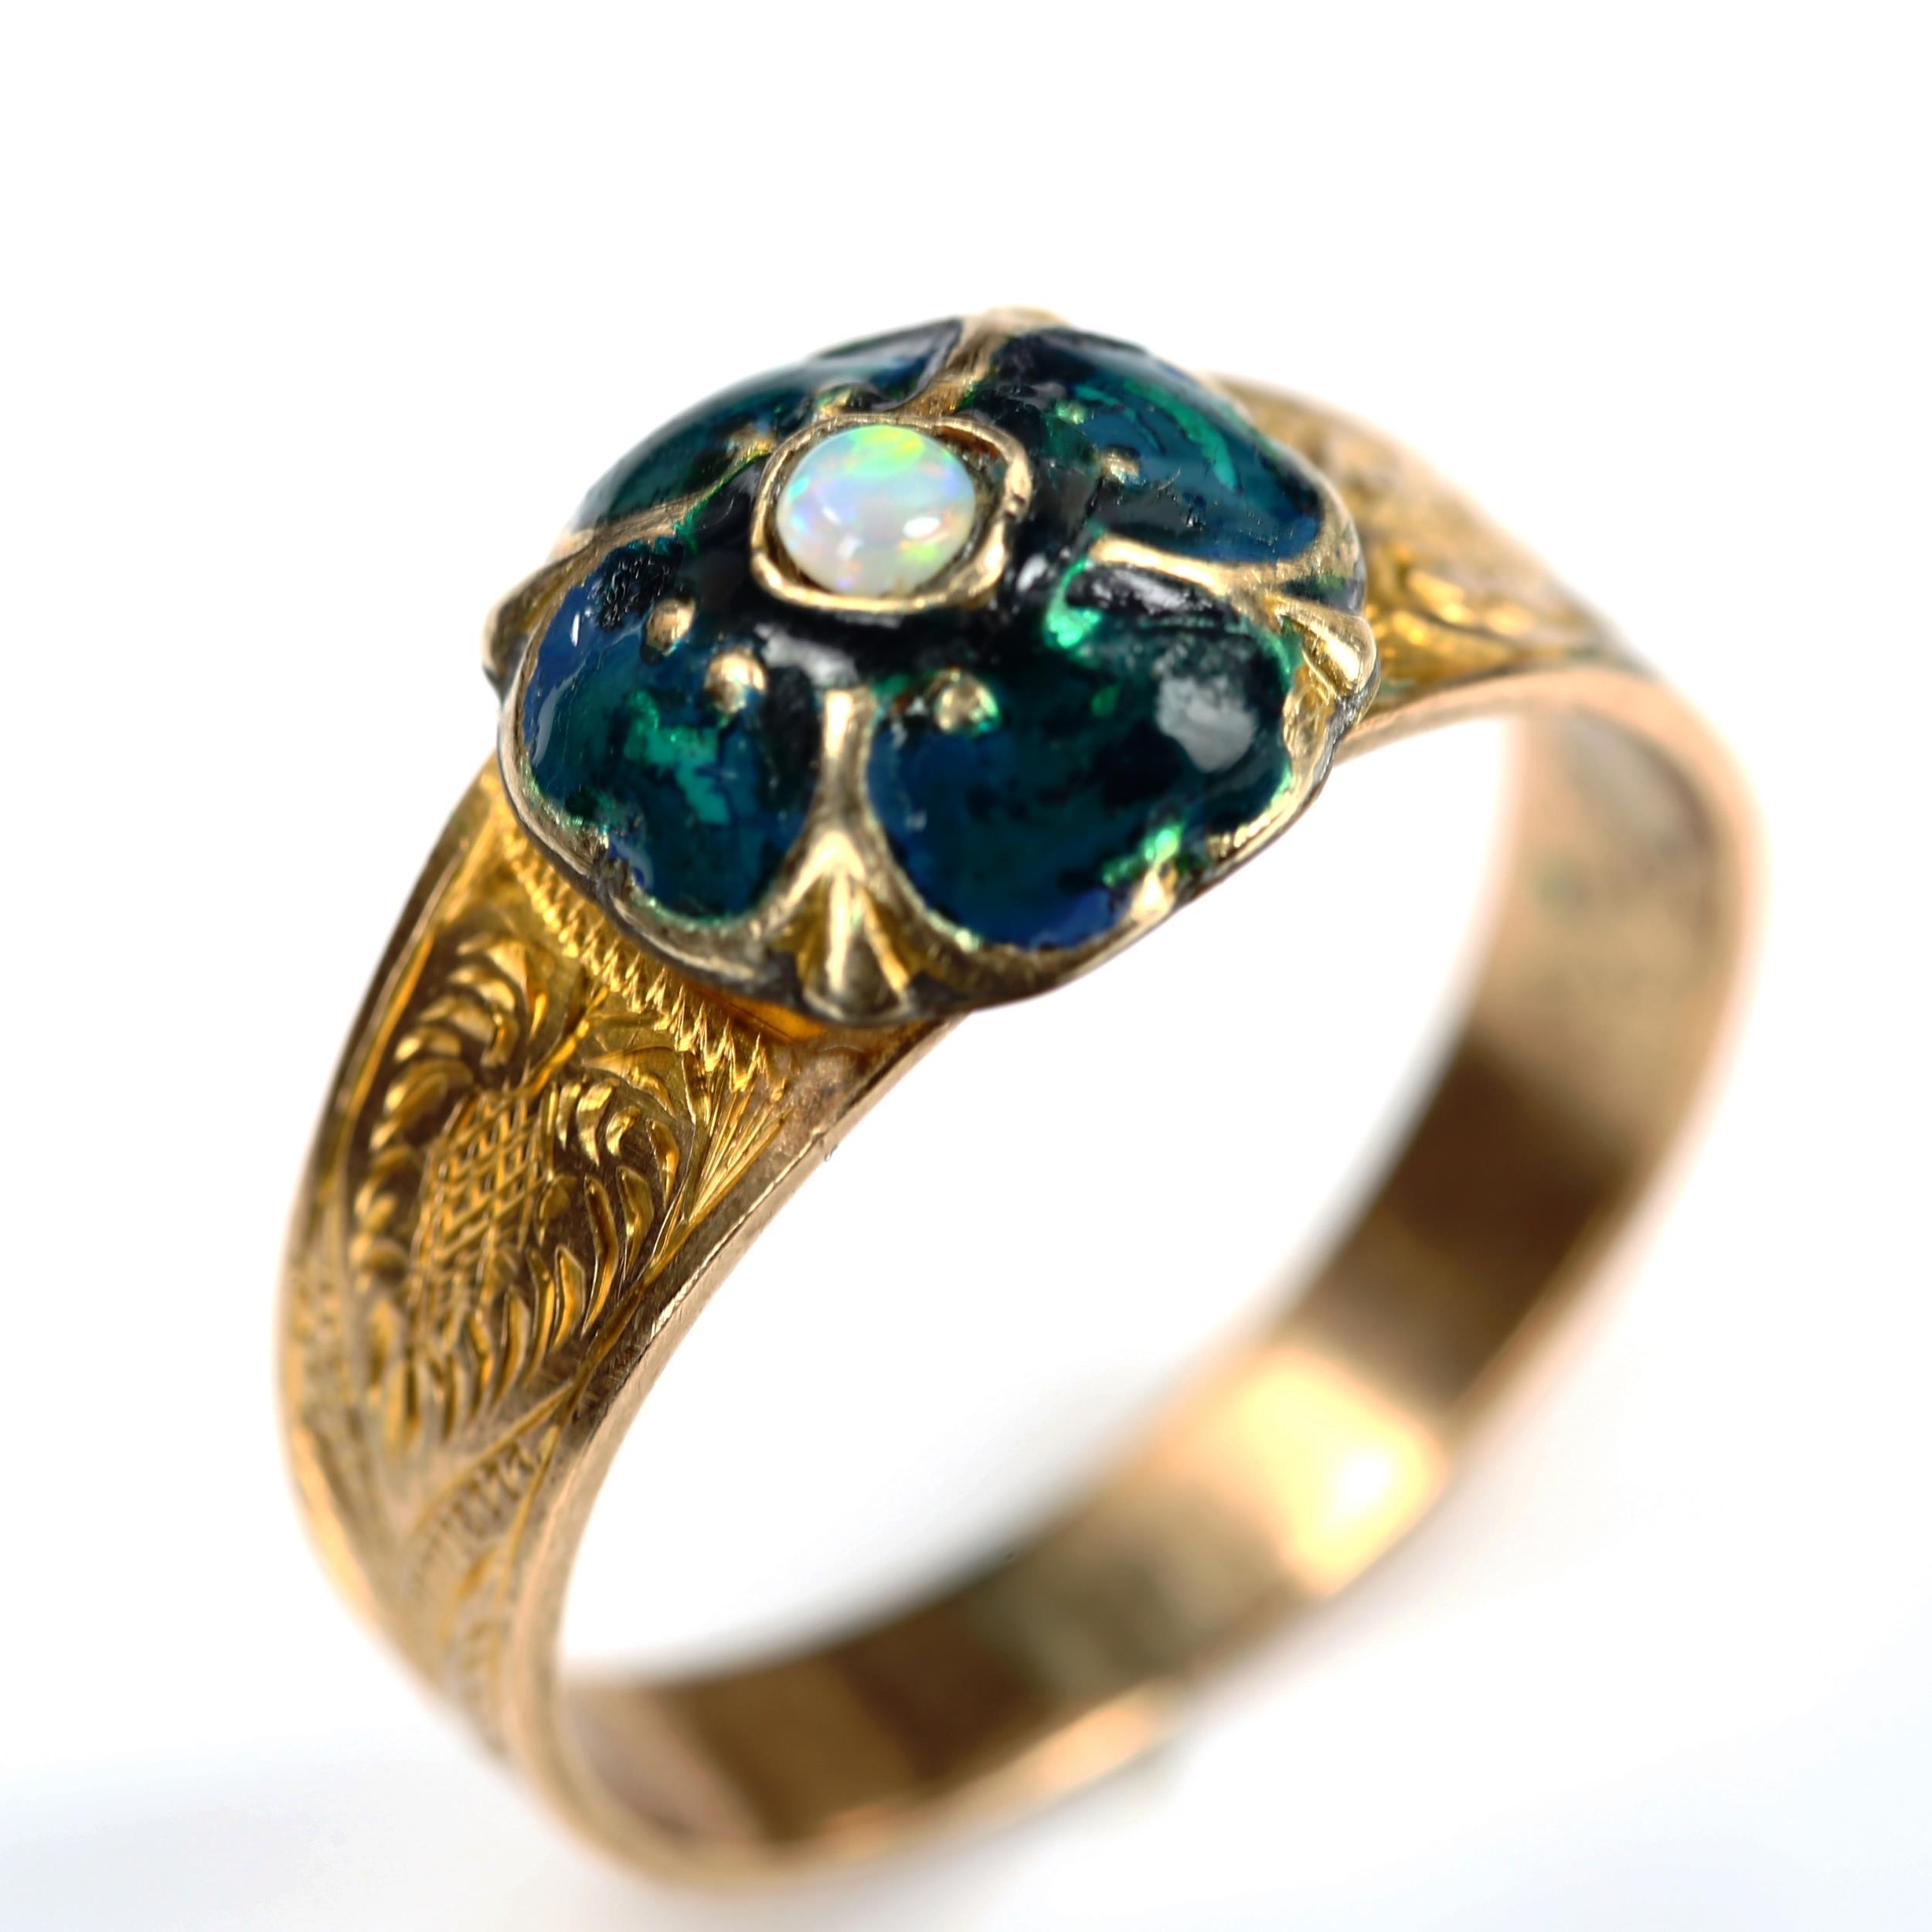 An Antique opal and enamel clover ring, unmarked gold settings with floral engraved shoulders, - Image 2 of 4